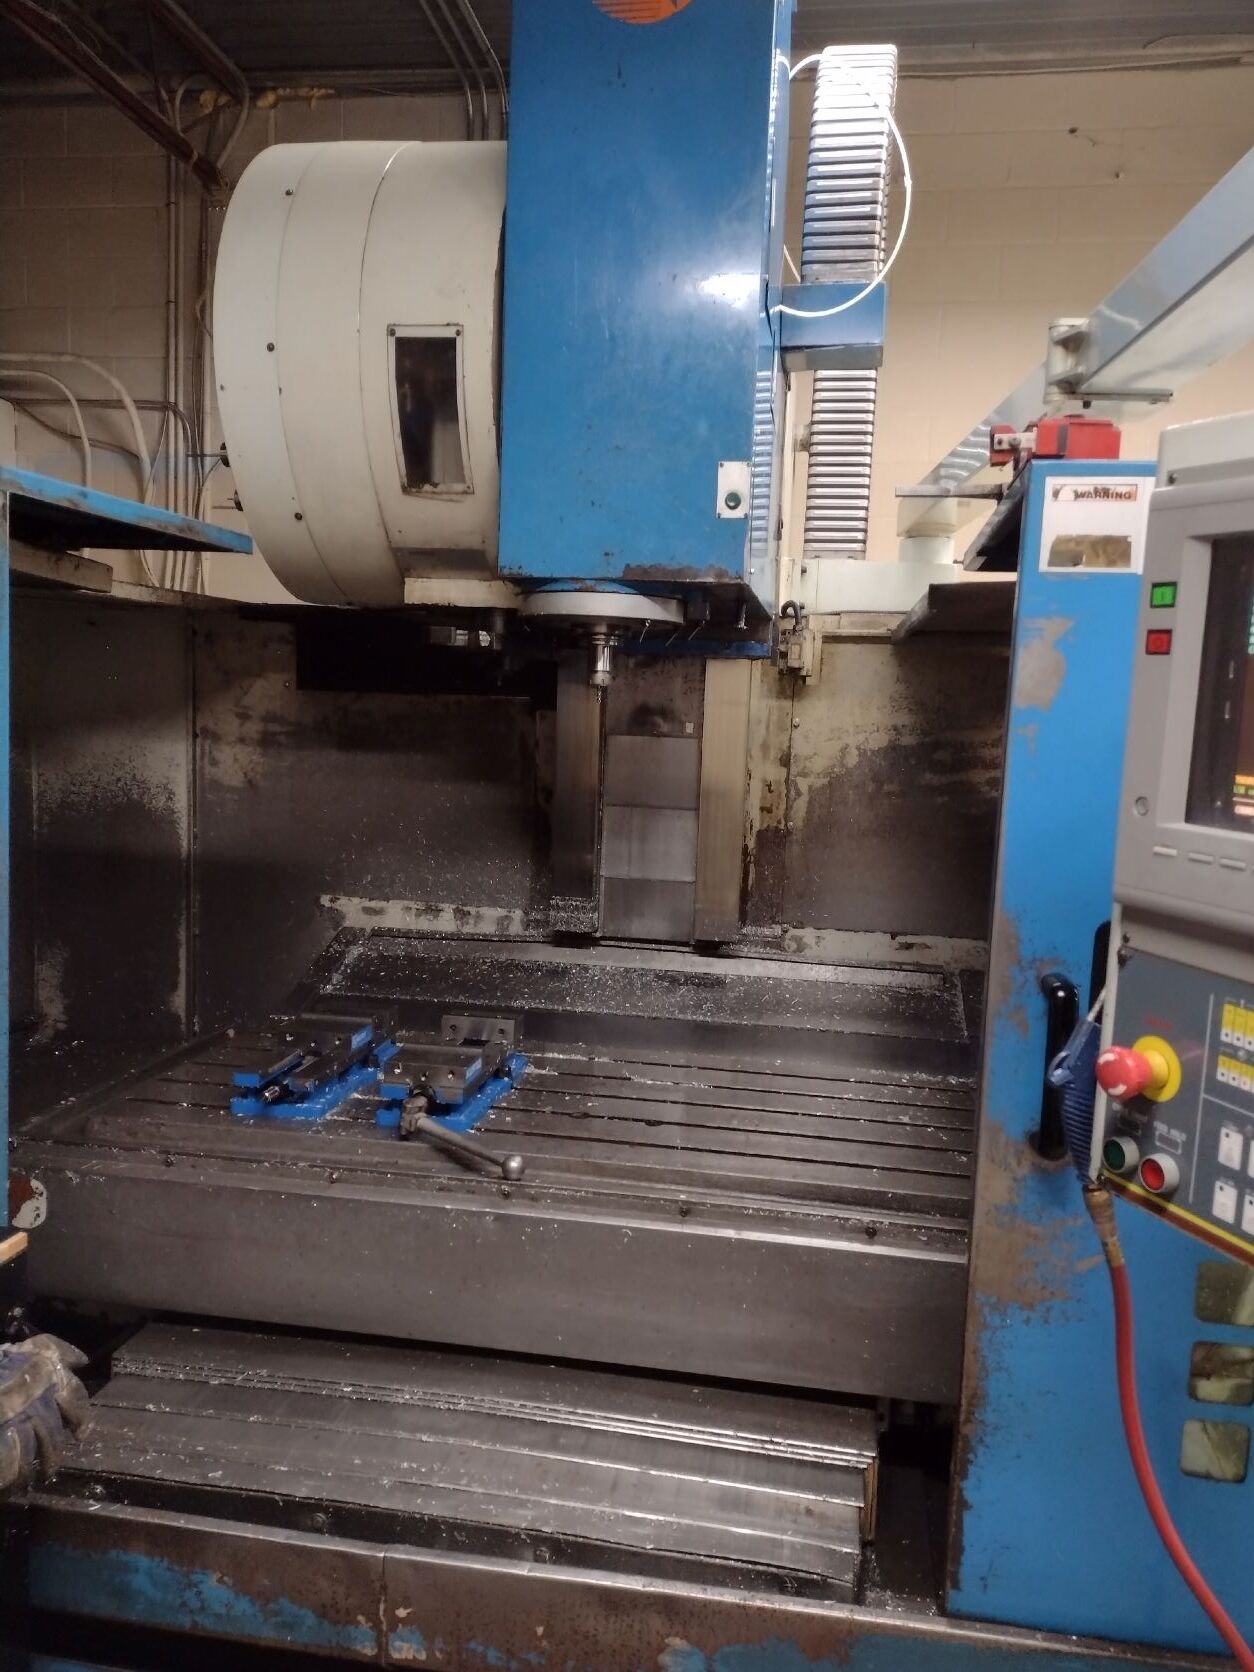 2000 TAKUMI V15A Milling, CNC Vertical Machining Centre | Industrial Machinery Exchange Inc.